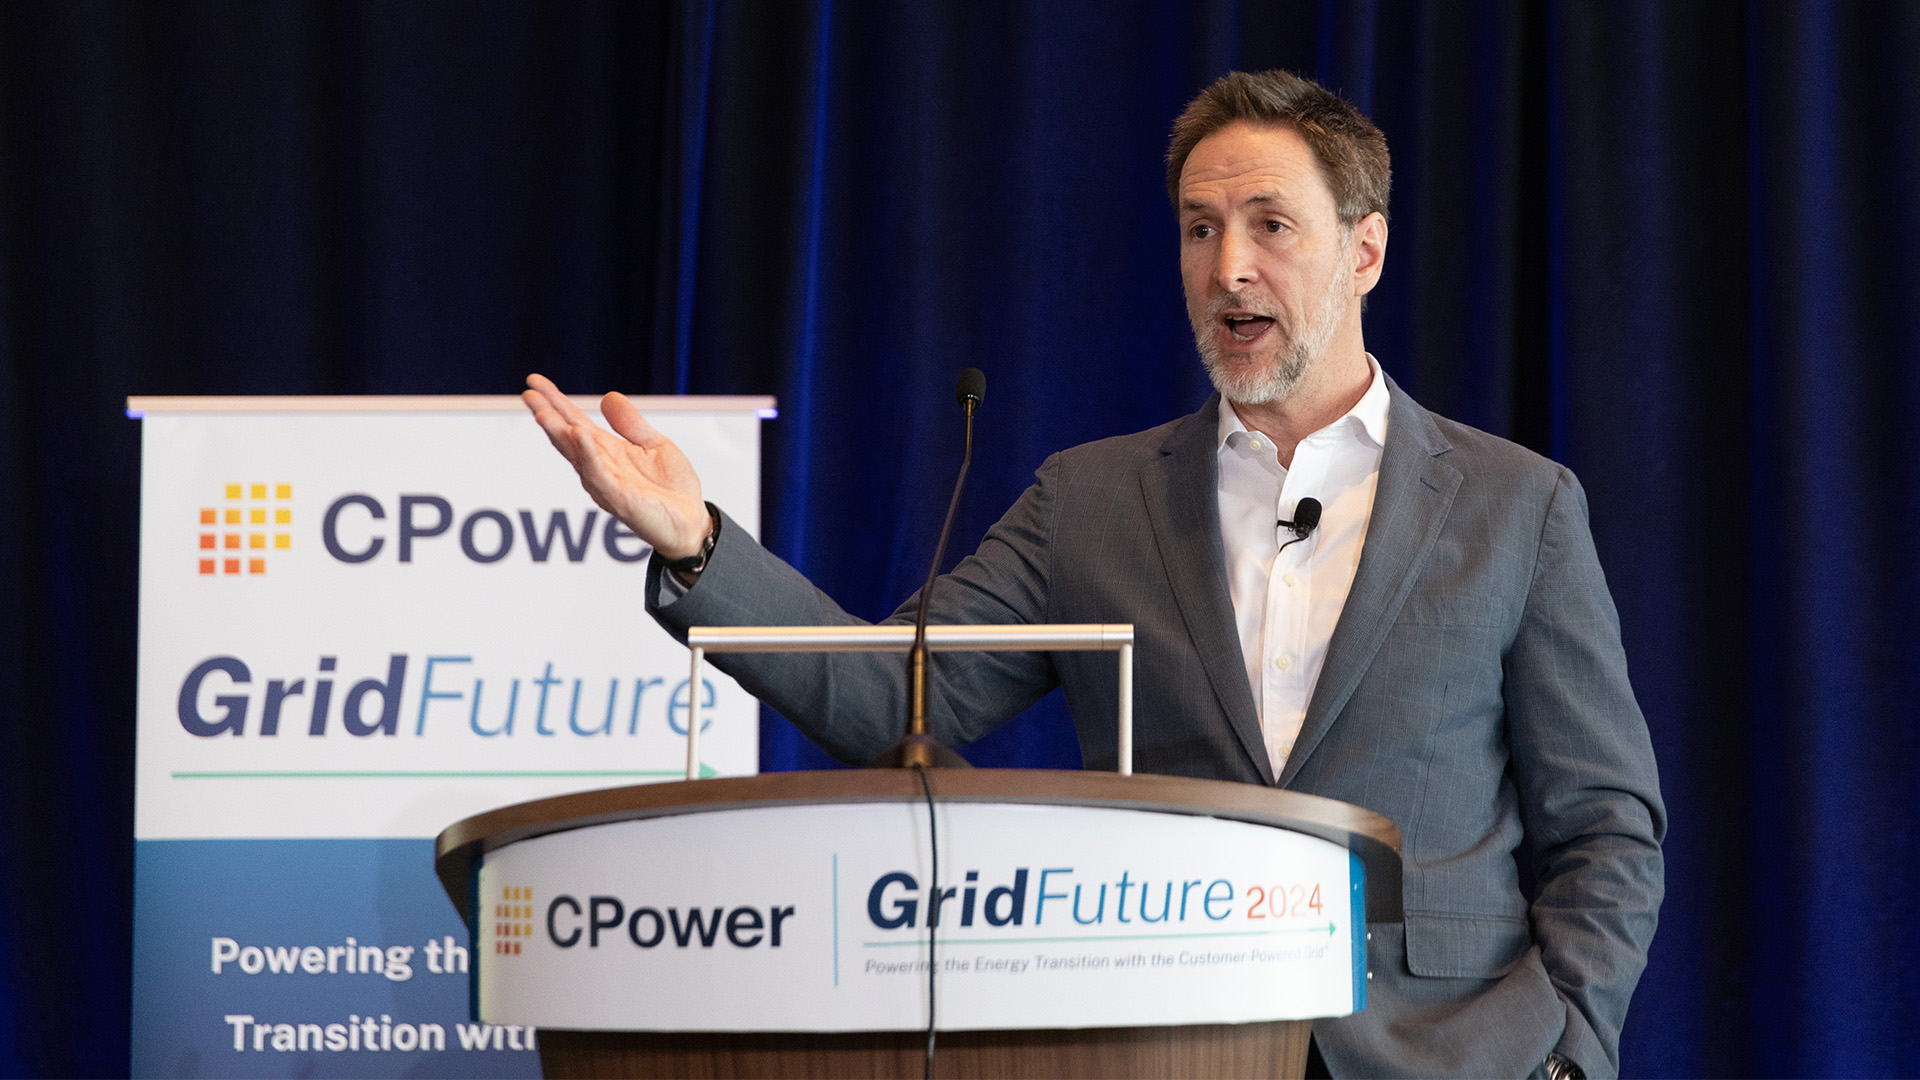 VPPs and CPower: Q&A with CEO Michael D. Smith